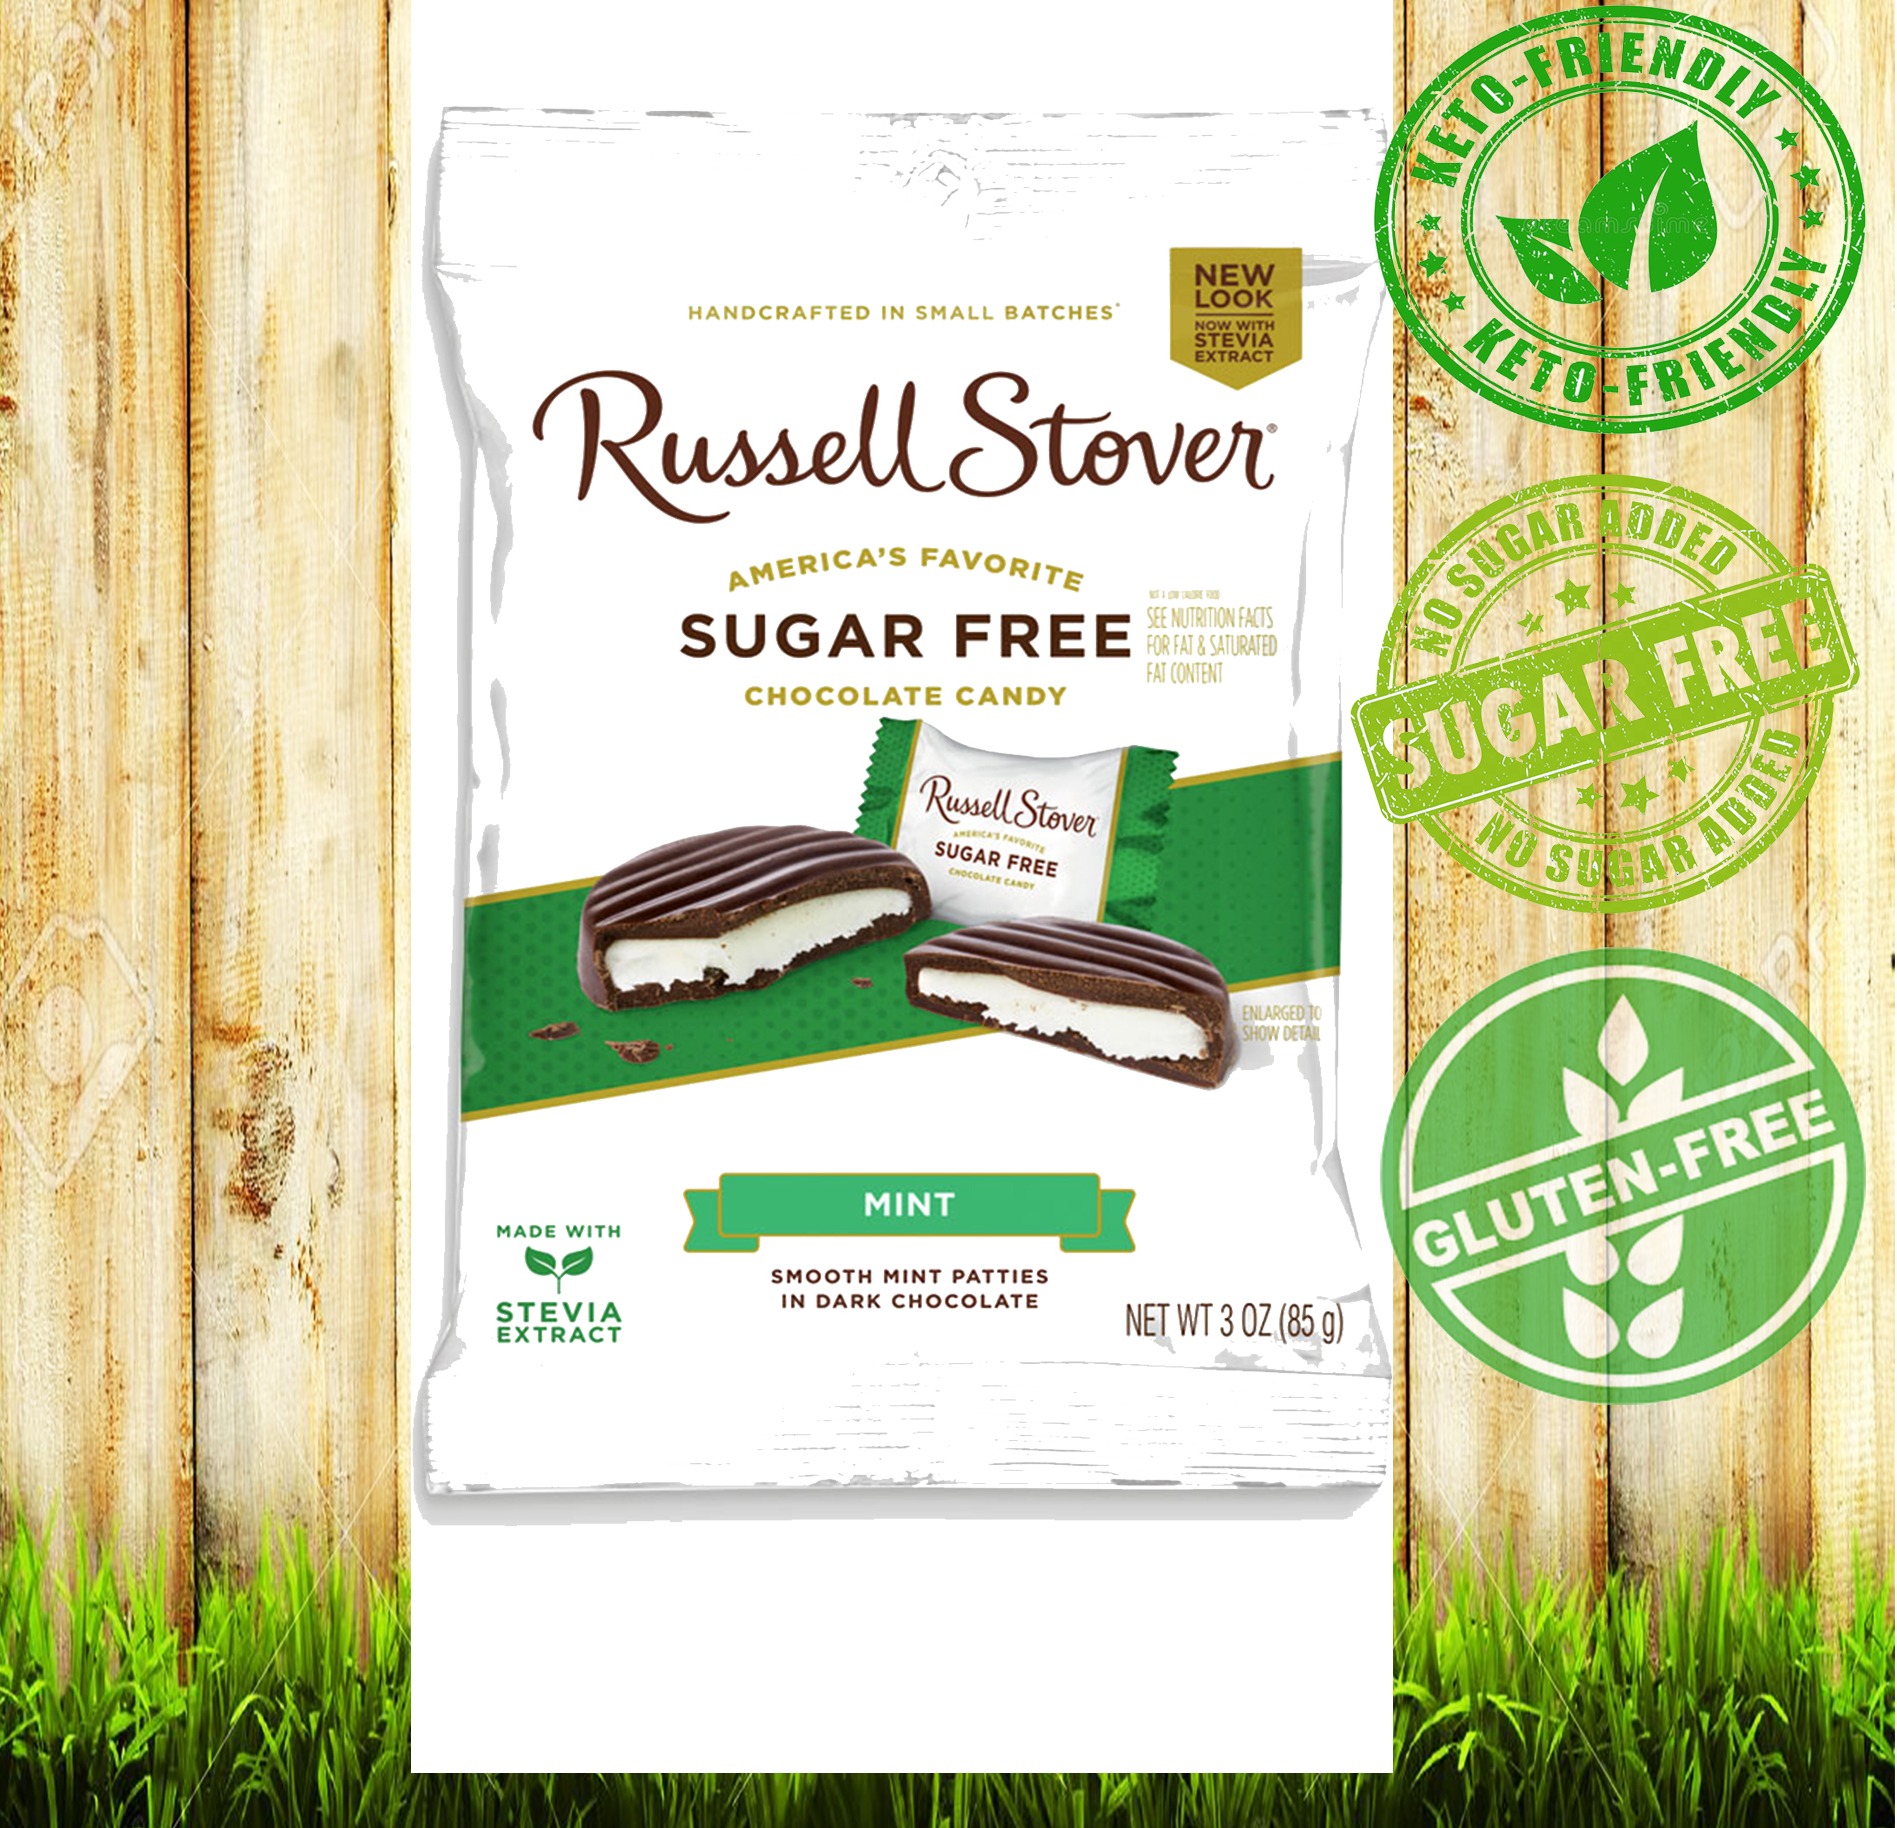 Russell Stover Sugar-Free Mint Patties, 3 Ounce Peg Bag 85GRAMS